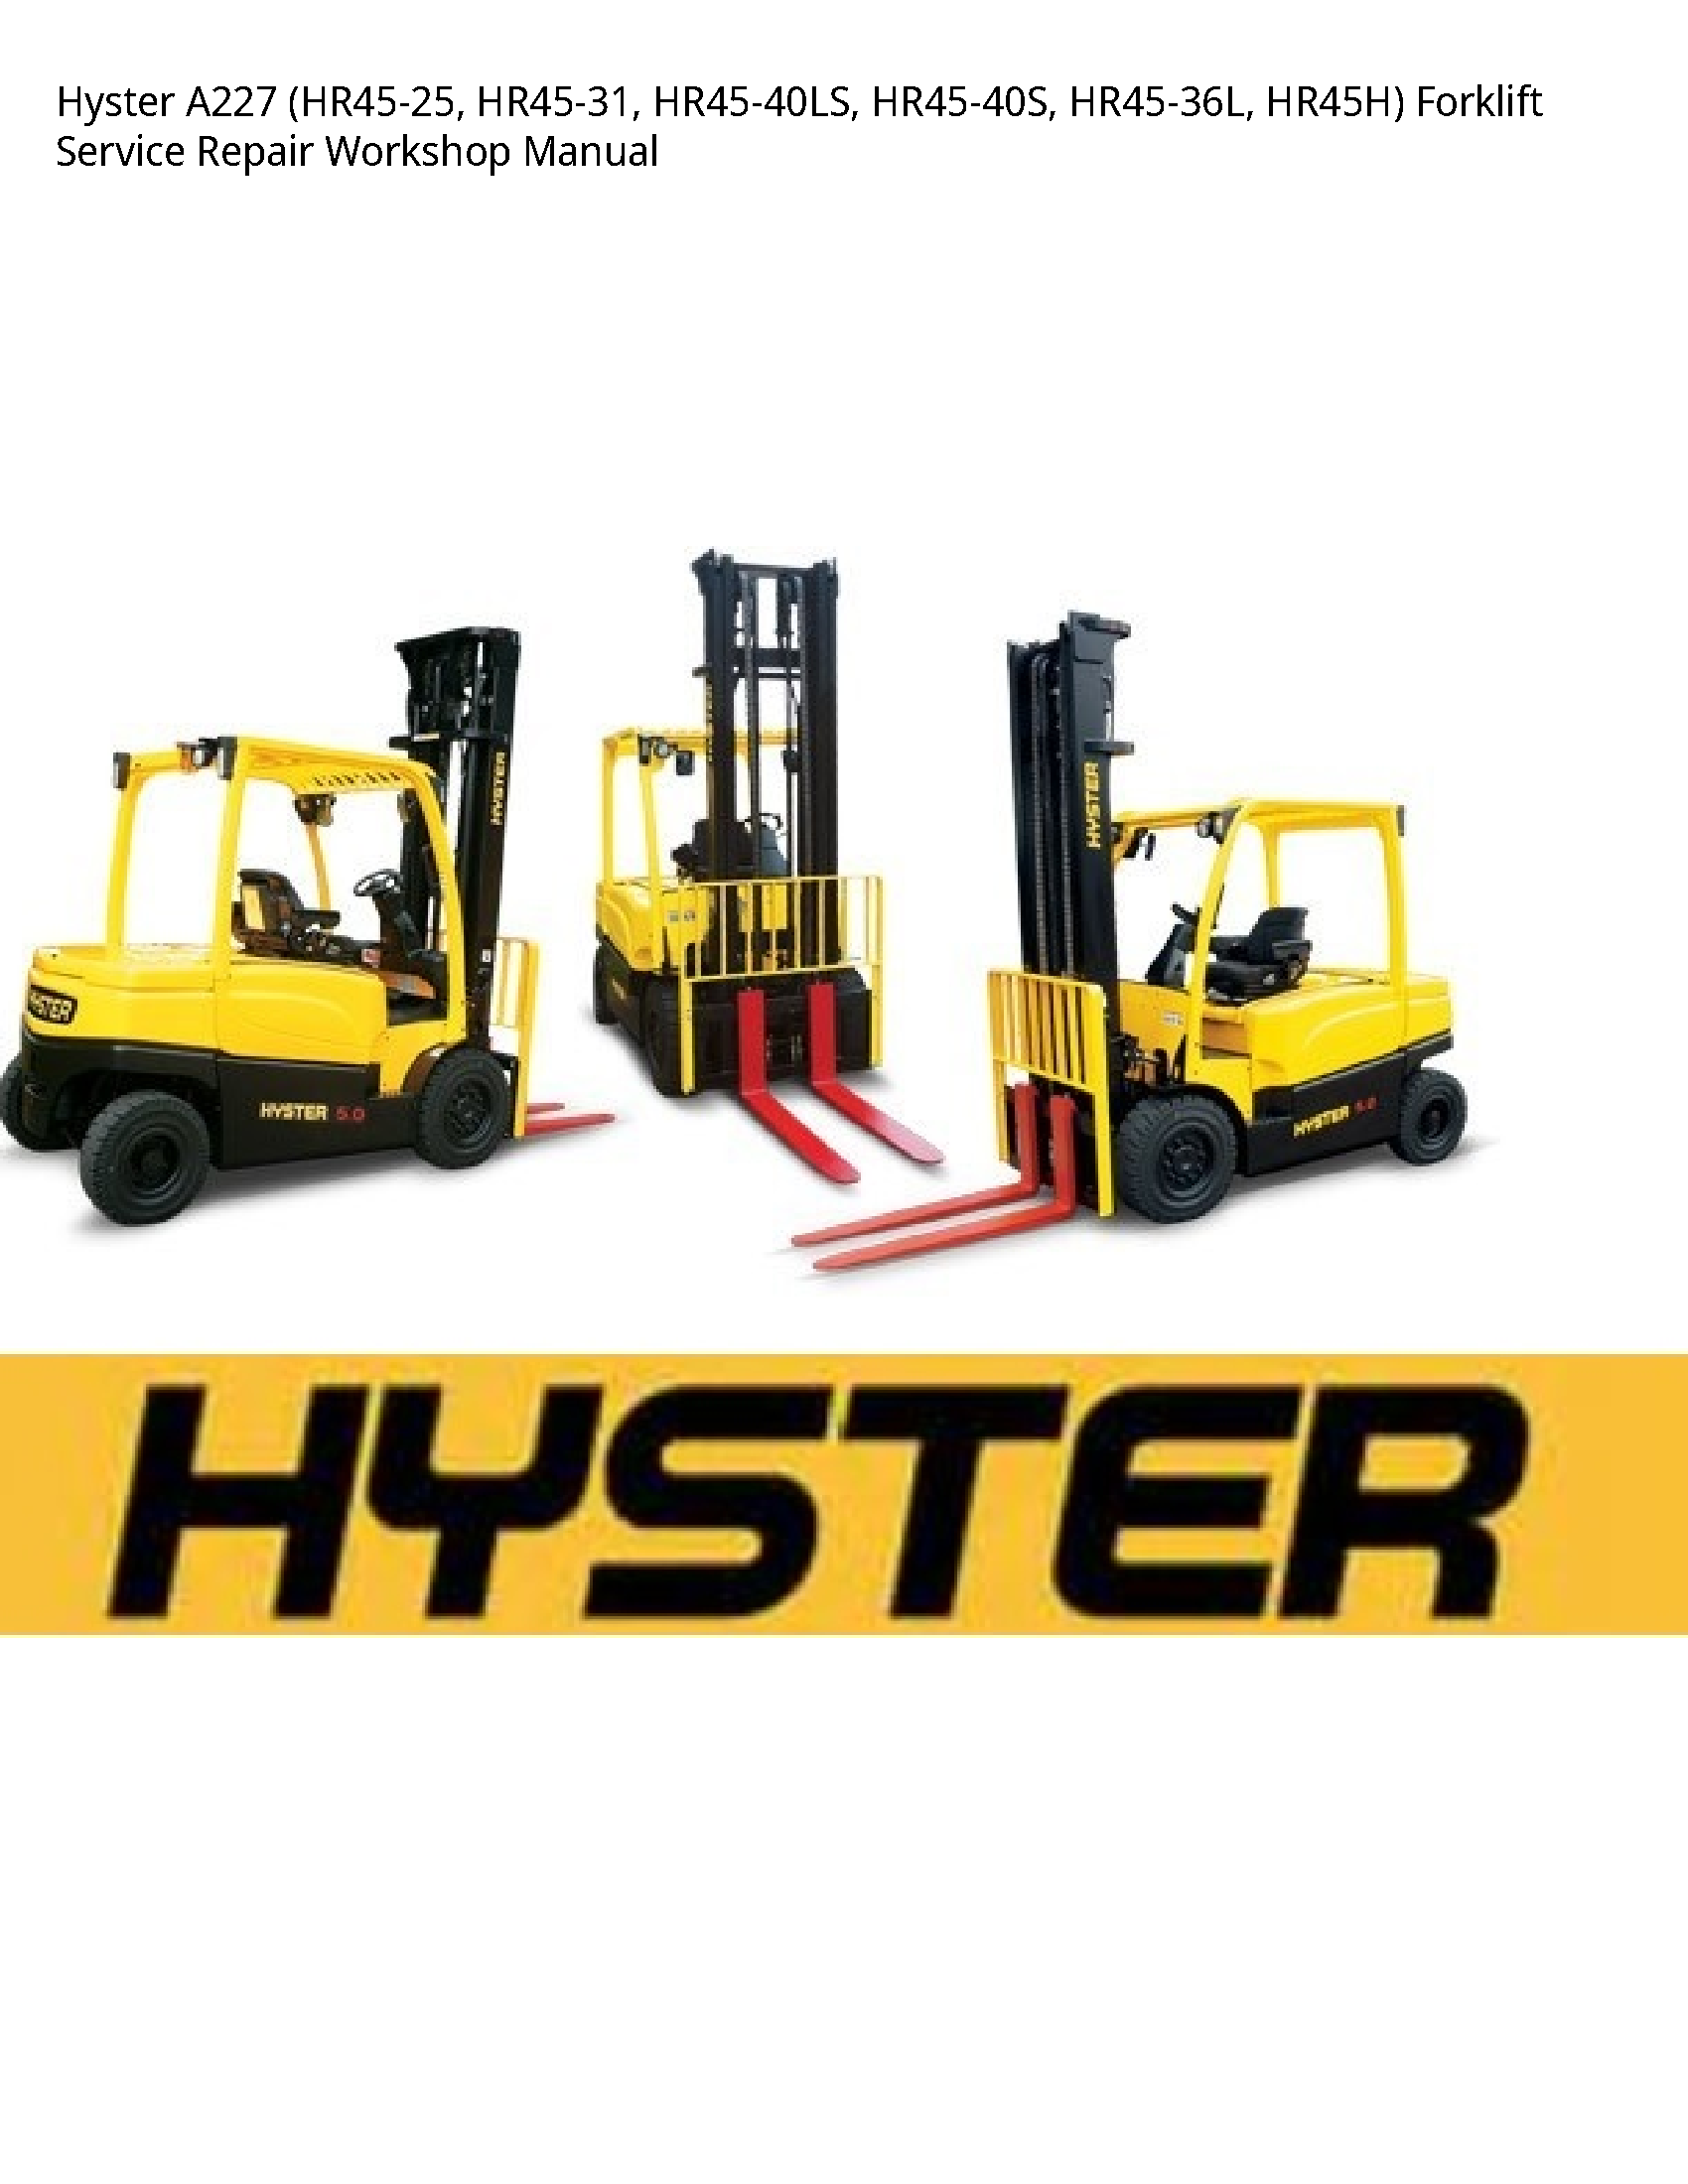 Hyster A227 Forklift manual